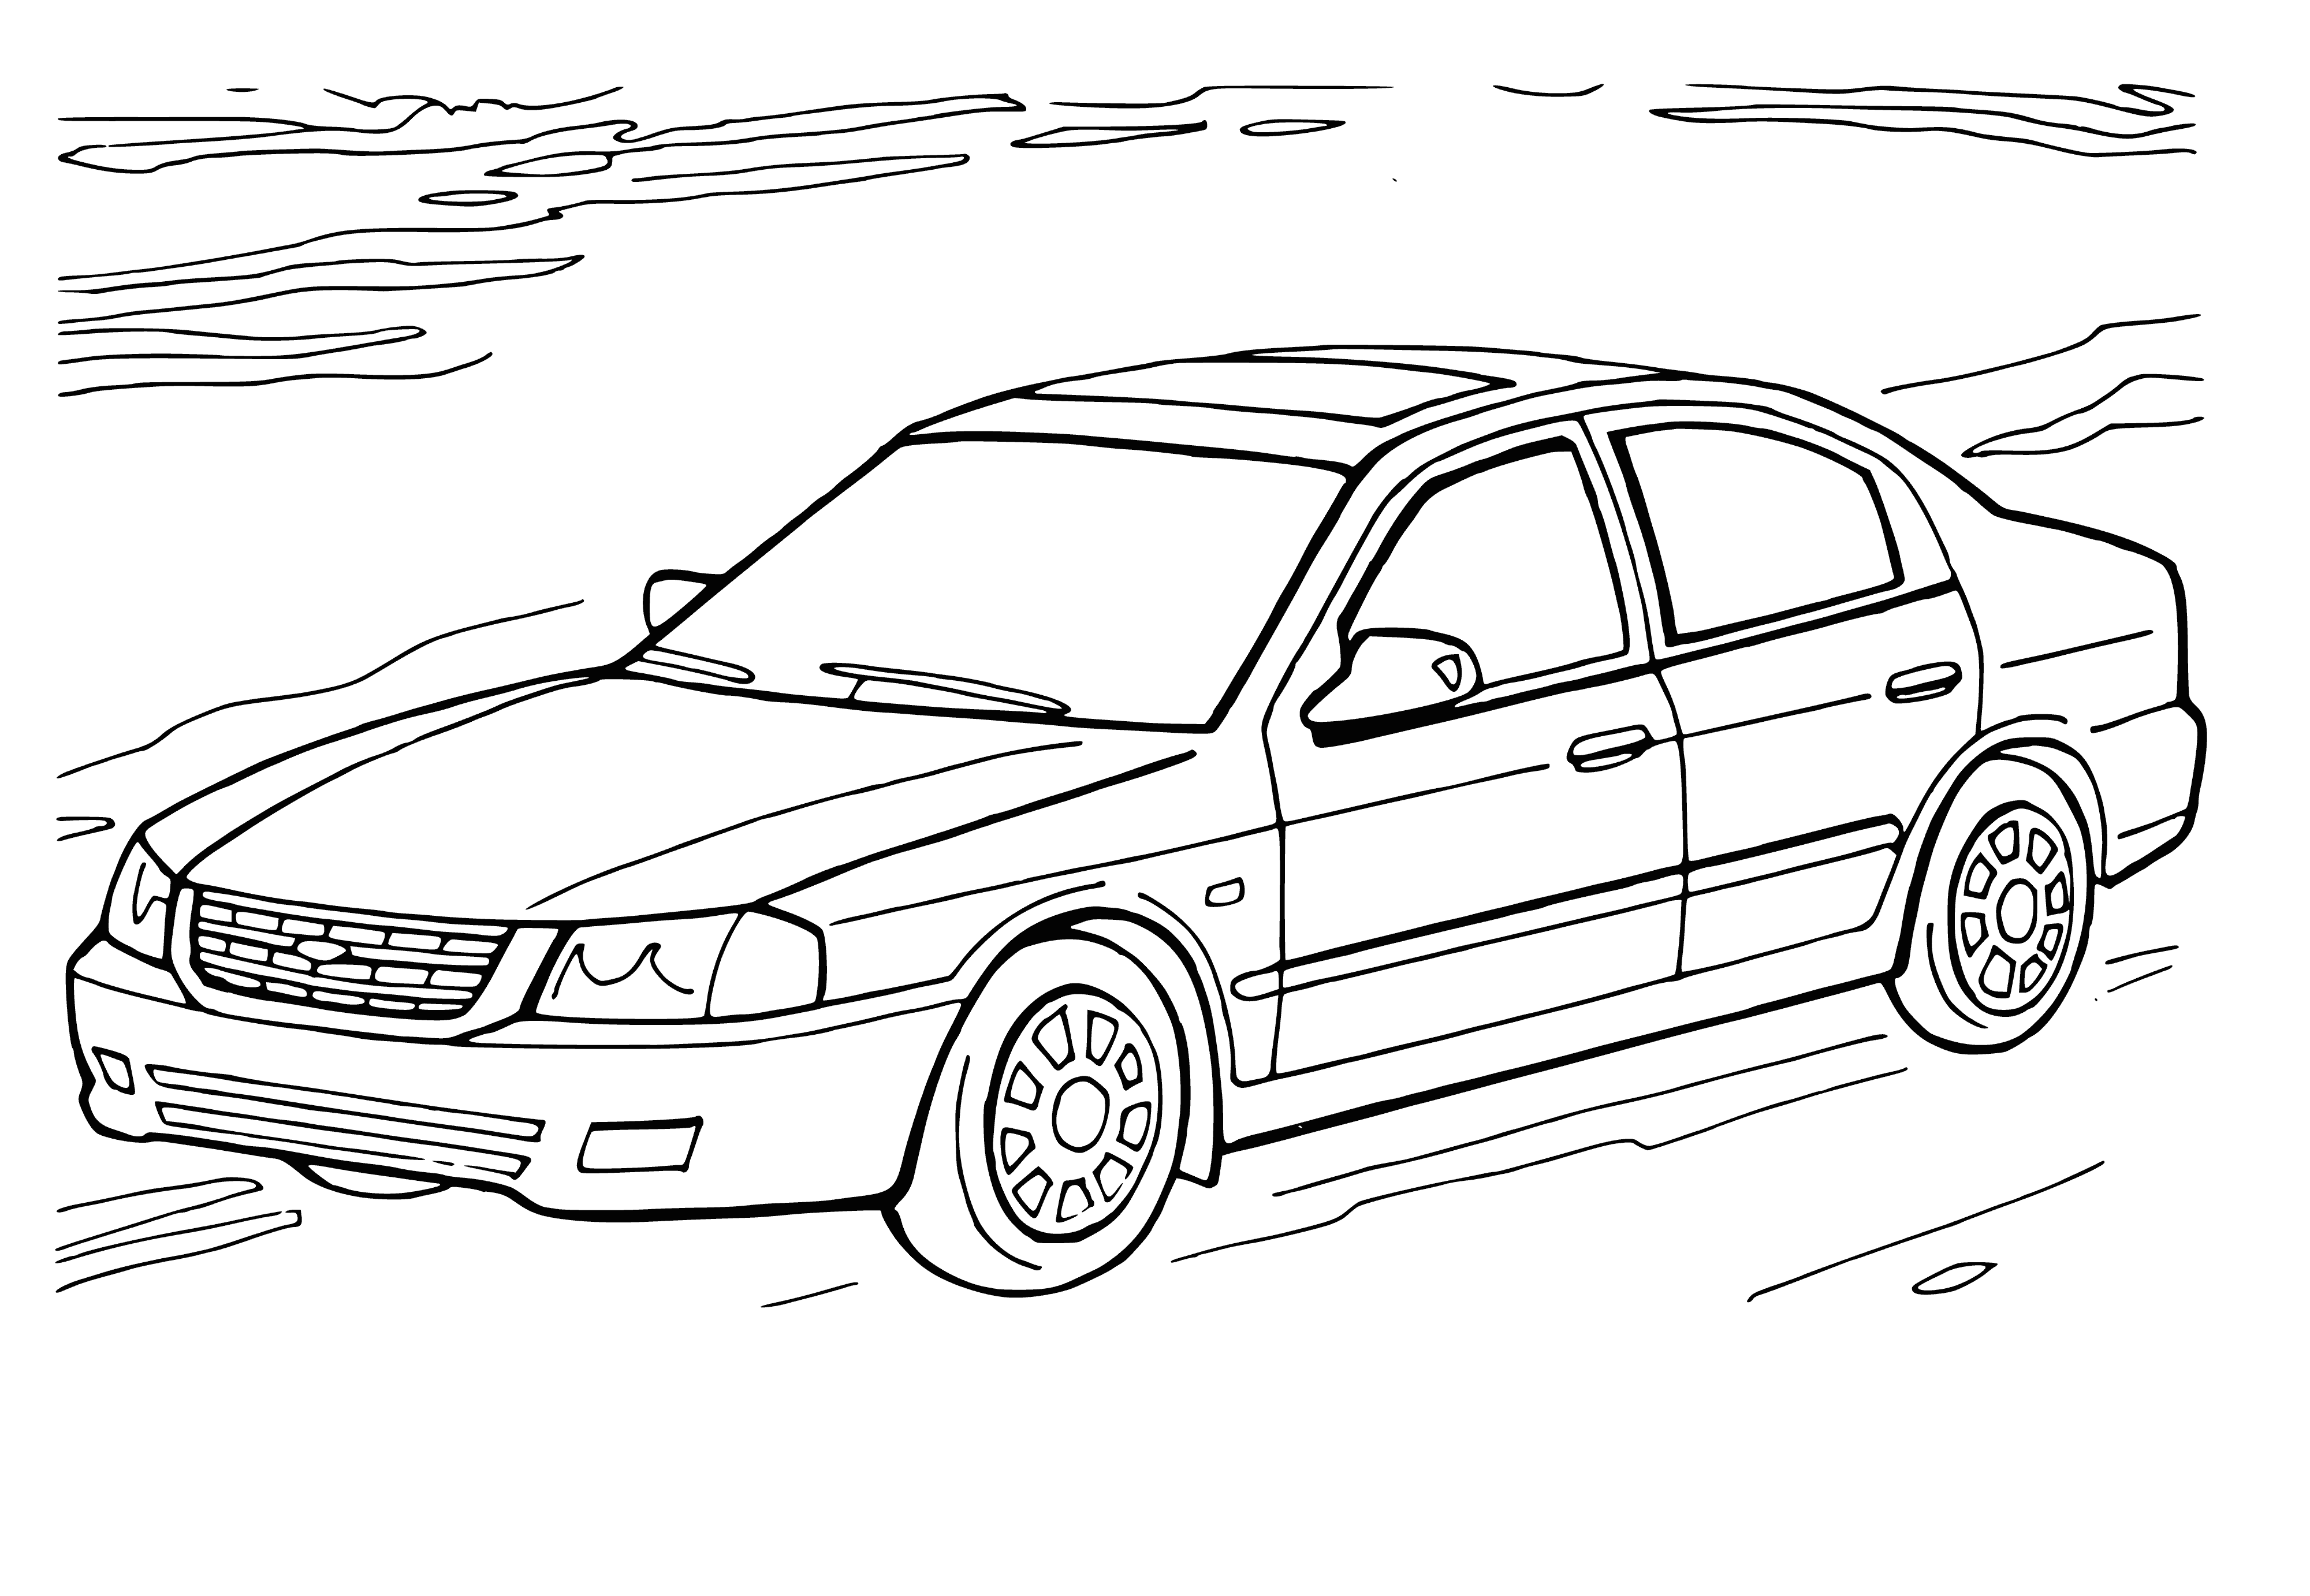 coloring page: Kia Magentis is a 4-door sedan seating 5 passengers & riding on 16-inch alloy wheels. It has a long nose, wide stance, short rear deck & body-color door handles & mirrors.